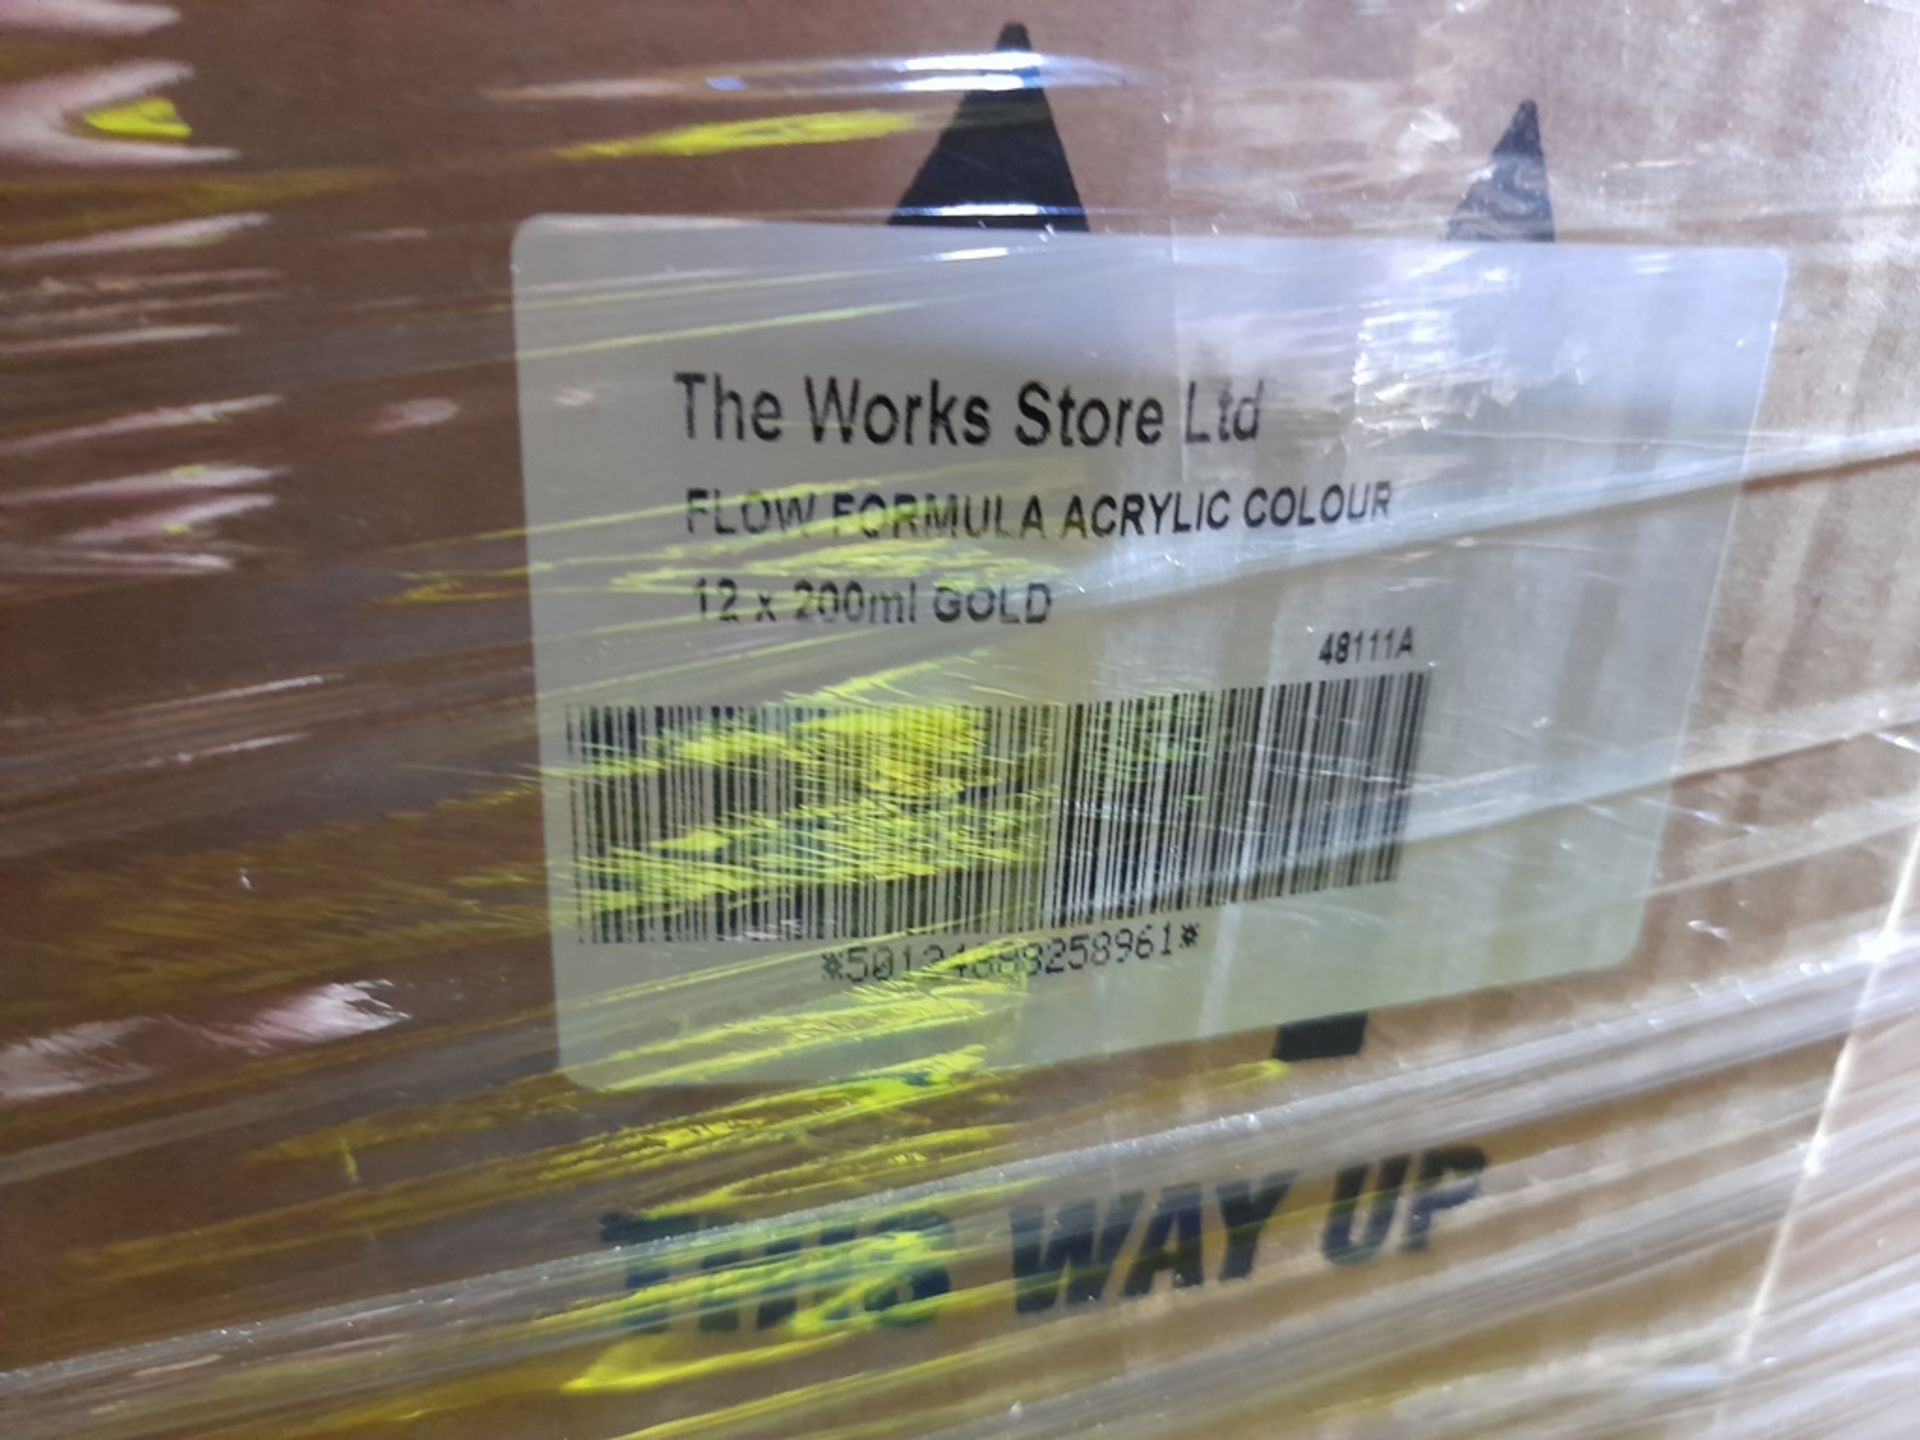 1 Mixed pallet including The Works Store Ltd Flow Formula Acrylic colour, 12 x 200ml, gold, - Image 6 of 7